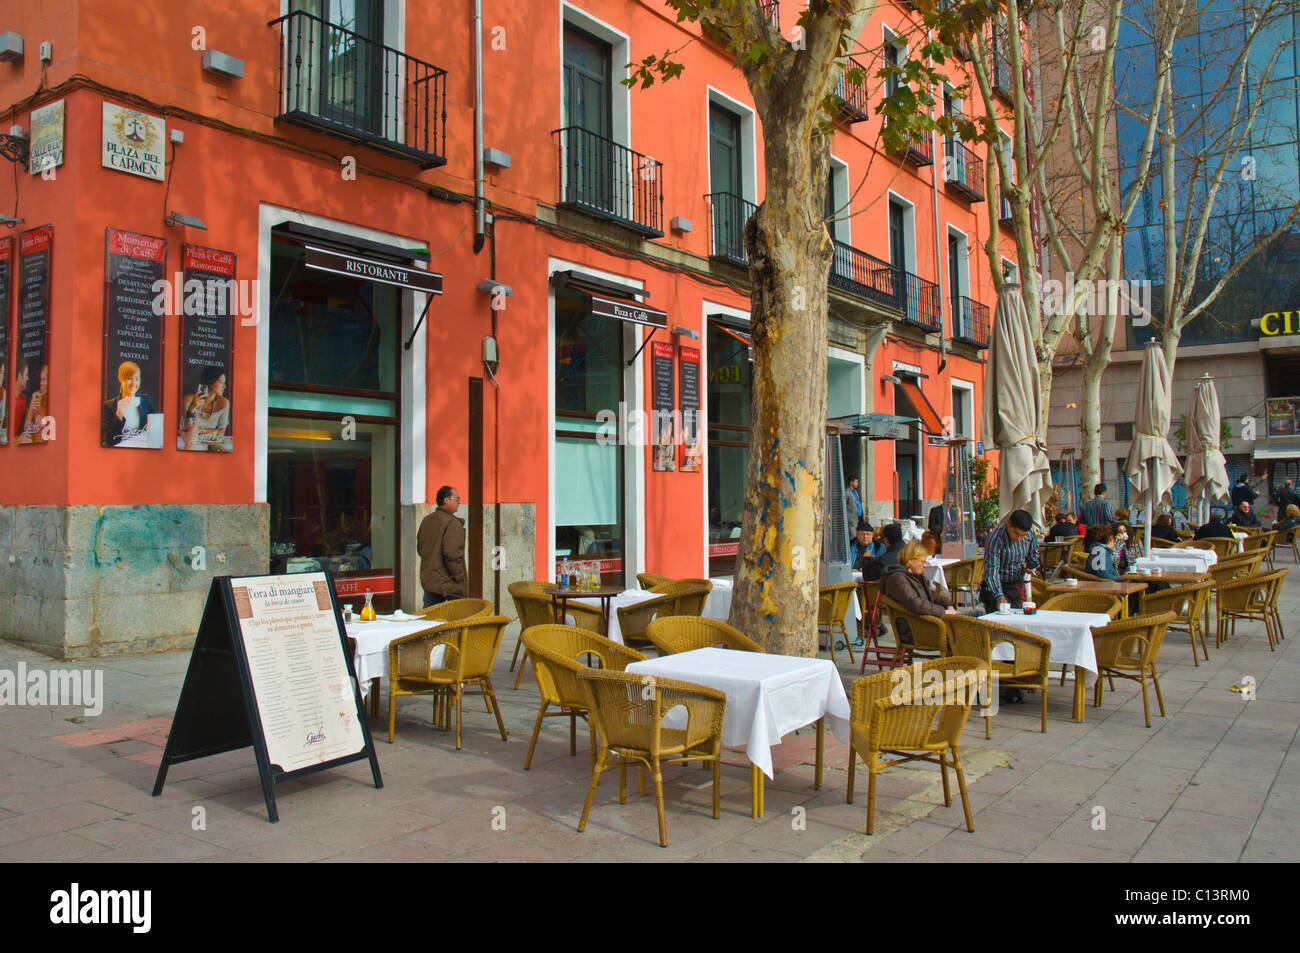 Cafe and restaurant tables at Plaza del Carmen square central Madrid Spain Europe Stock Photo